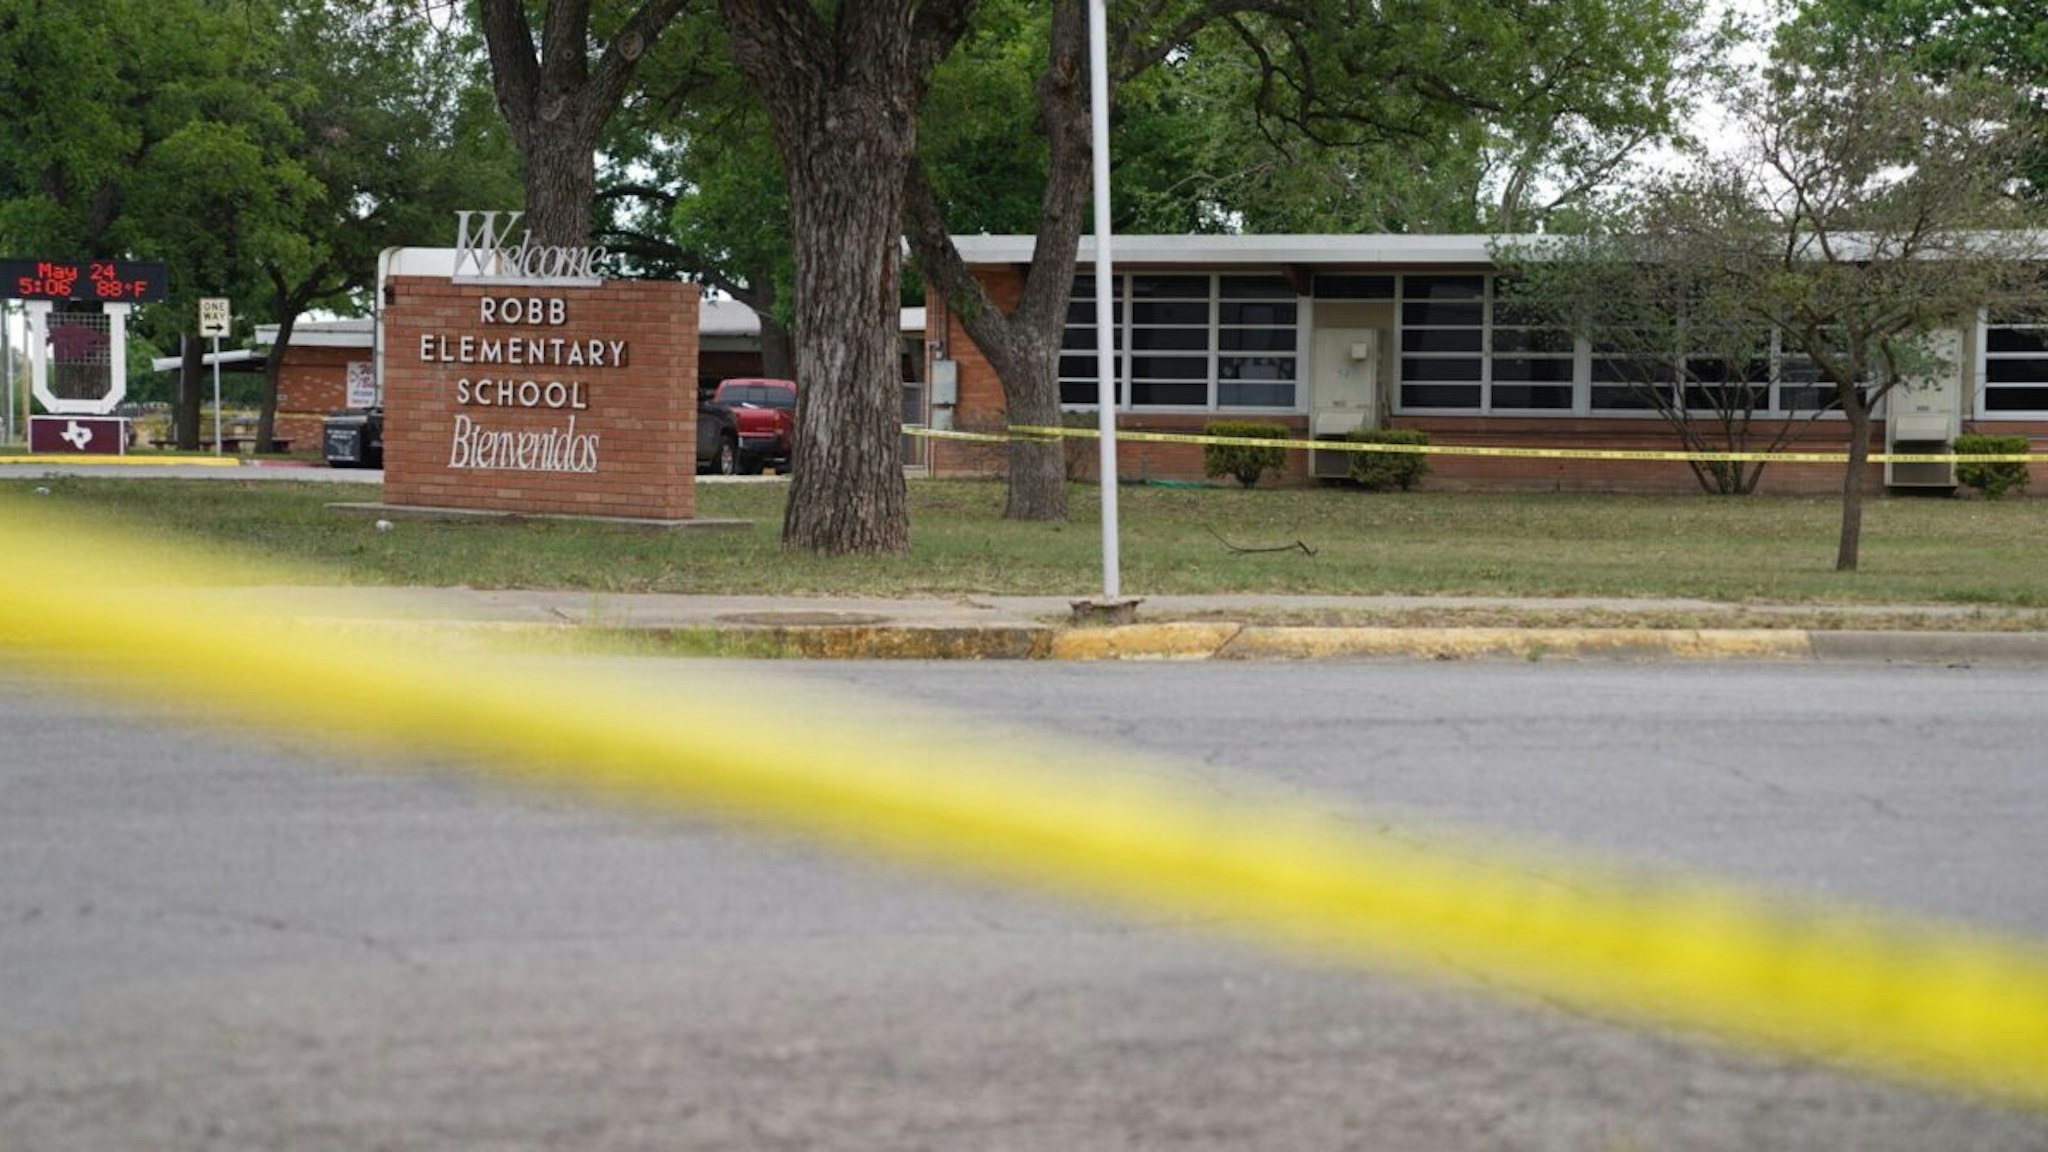 Sheriff crime scene tape is seen outside of Robb Elementary School as State troopers guard the area in Uvalde, Texas, on May 24, 2022